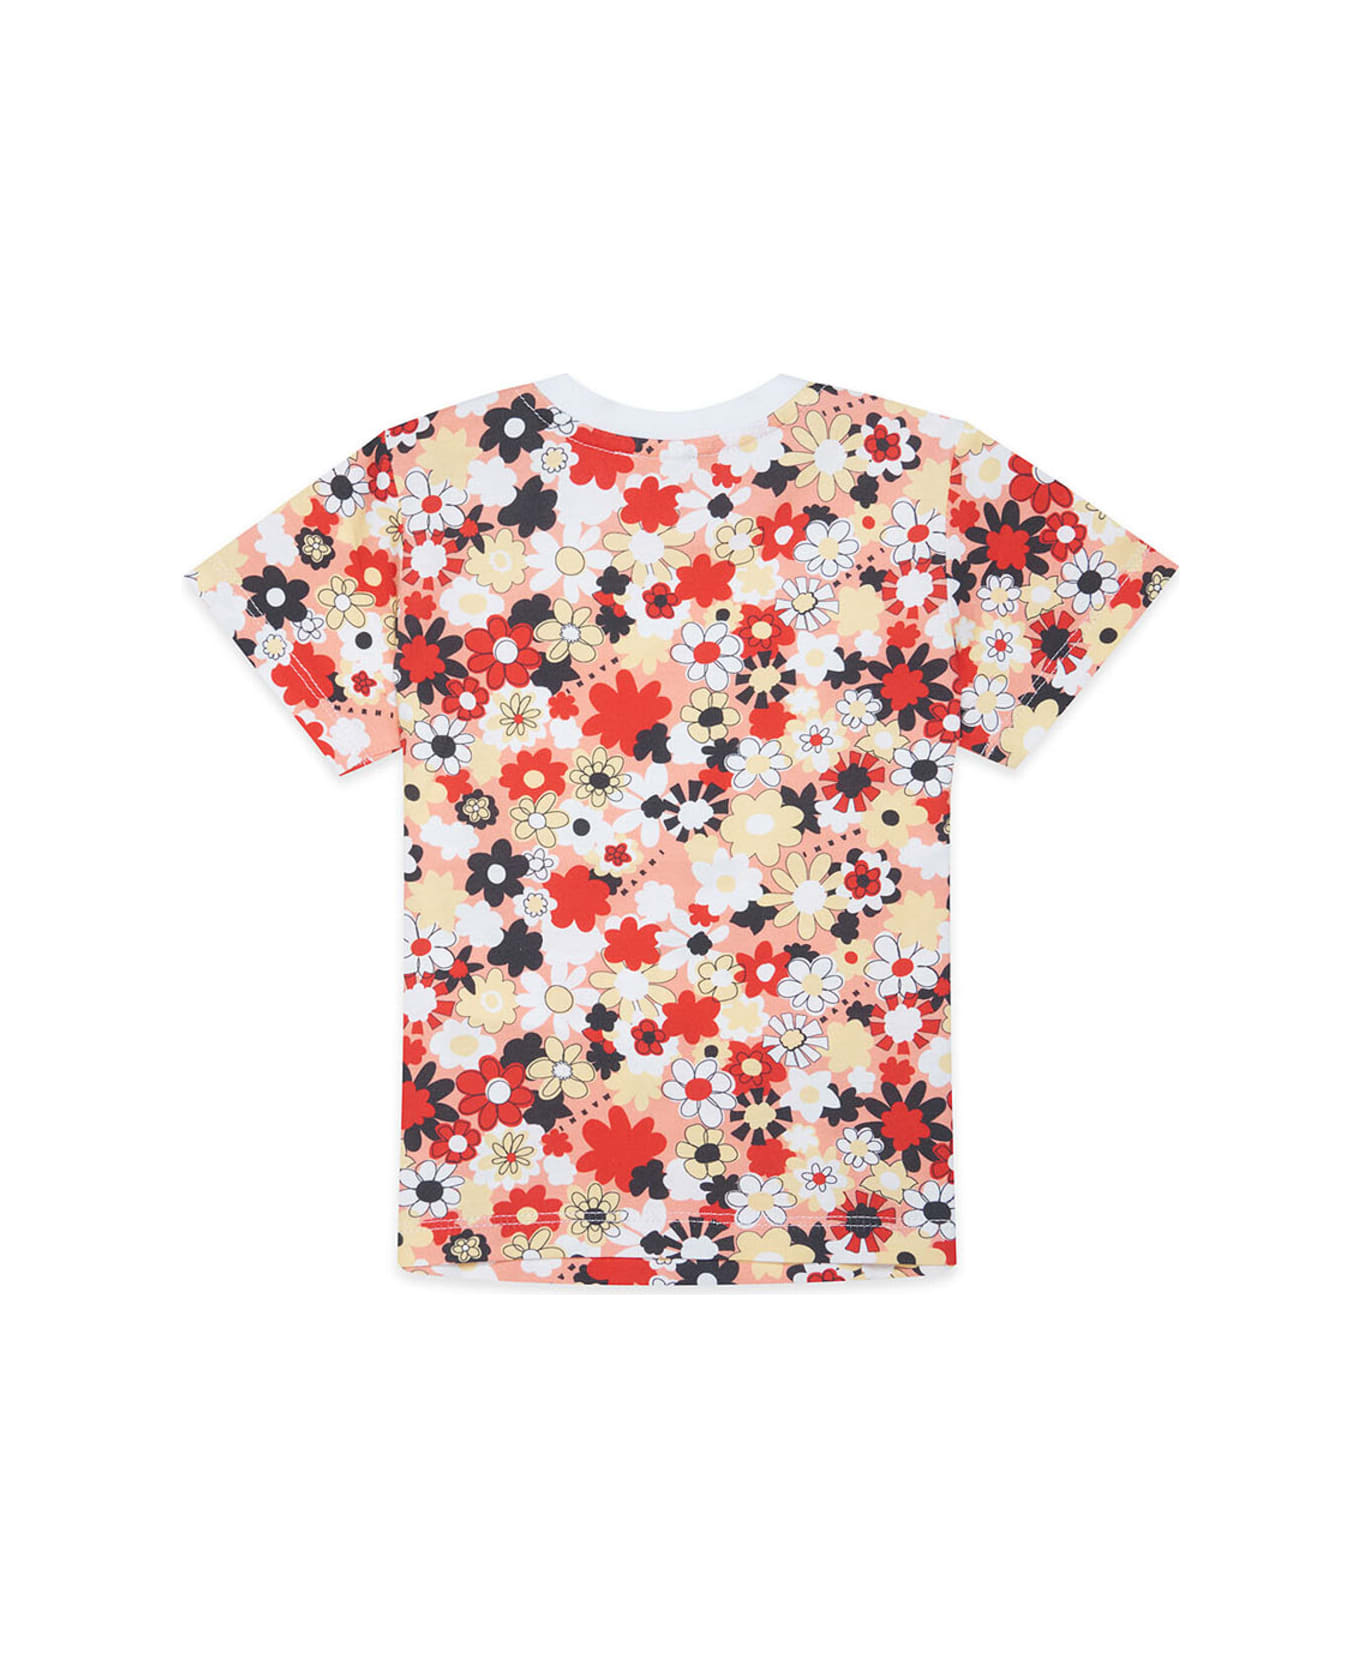 Marni Mt54b T-shirt Marni White Jersey T-shirt With Allover Flowers Pattern - White